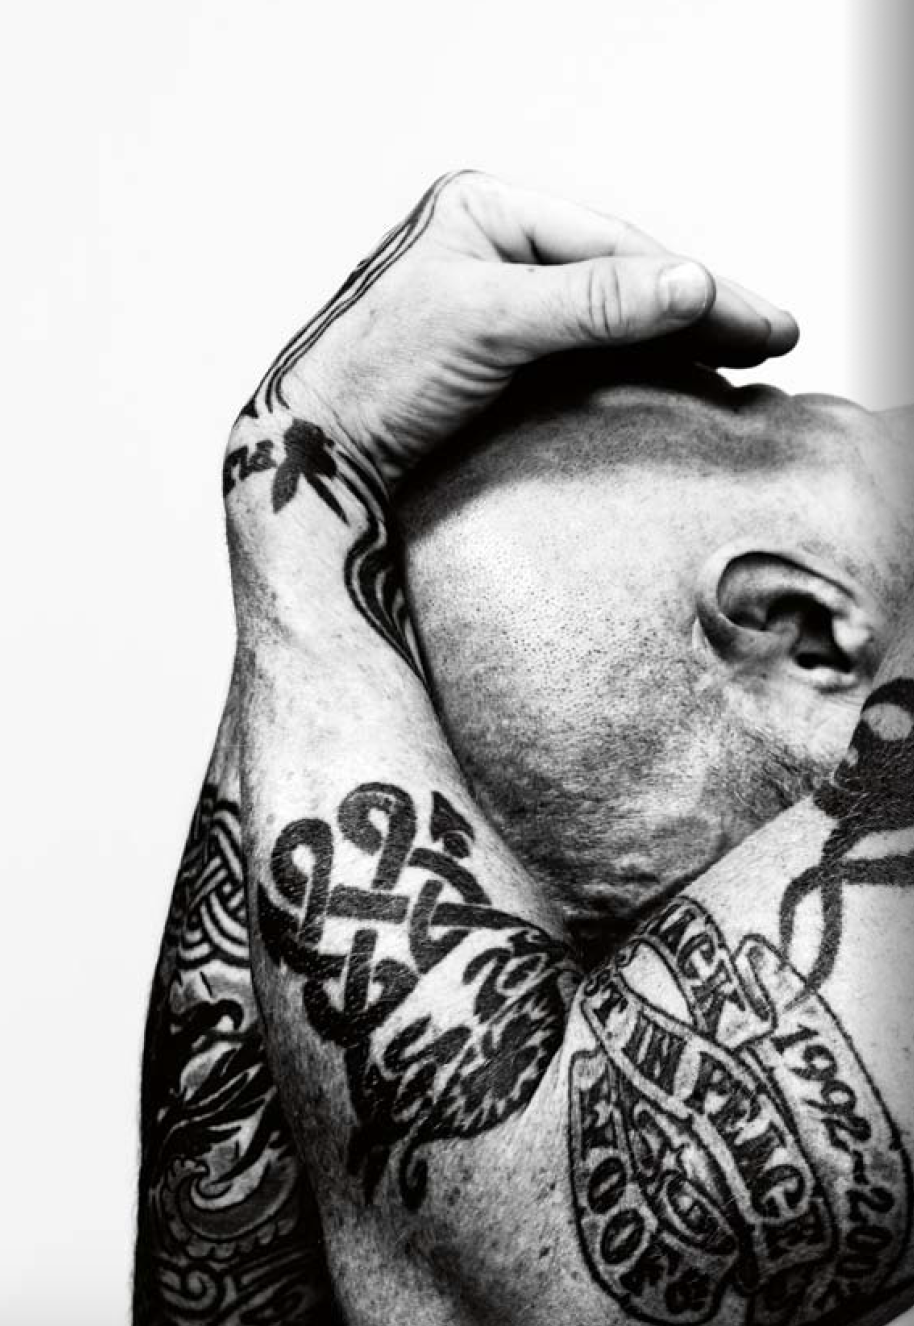 A CONVERSATION WITH BUCK ANGEL